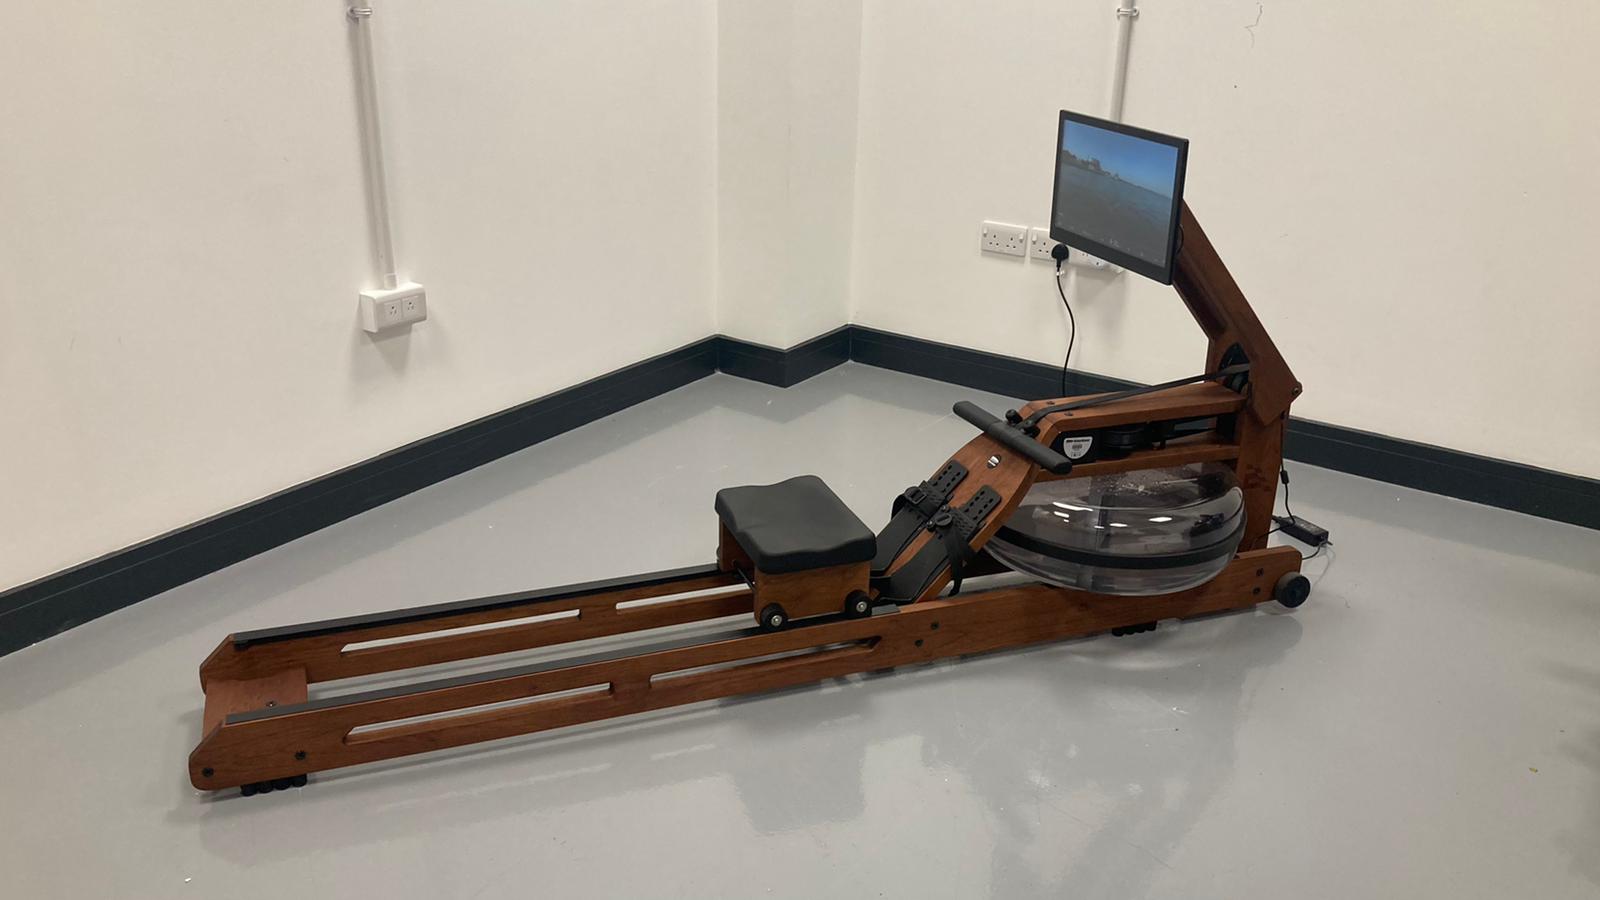 Ergatta Rower set up in Live Science testing centre